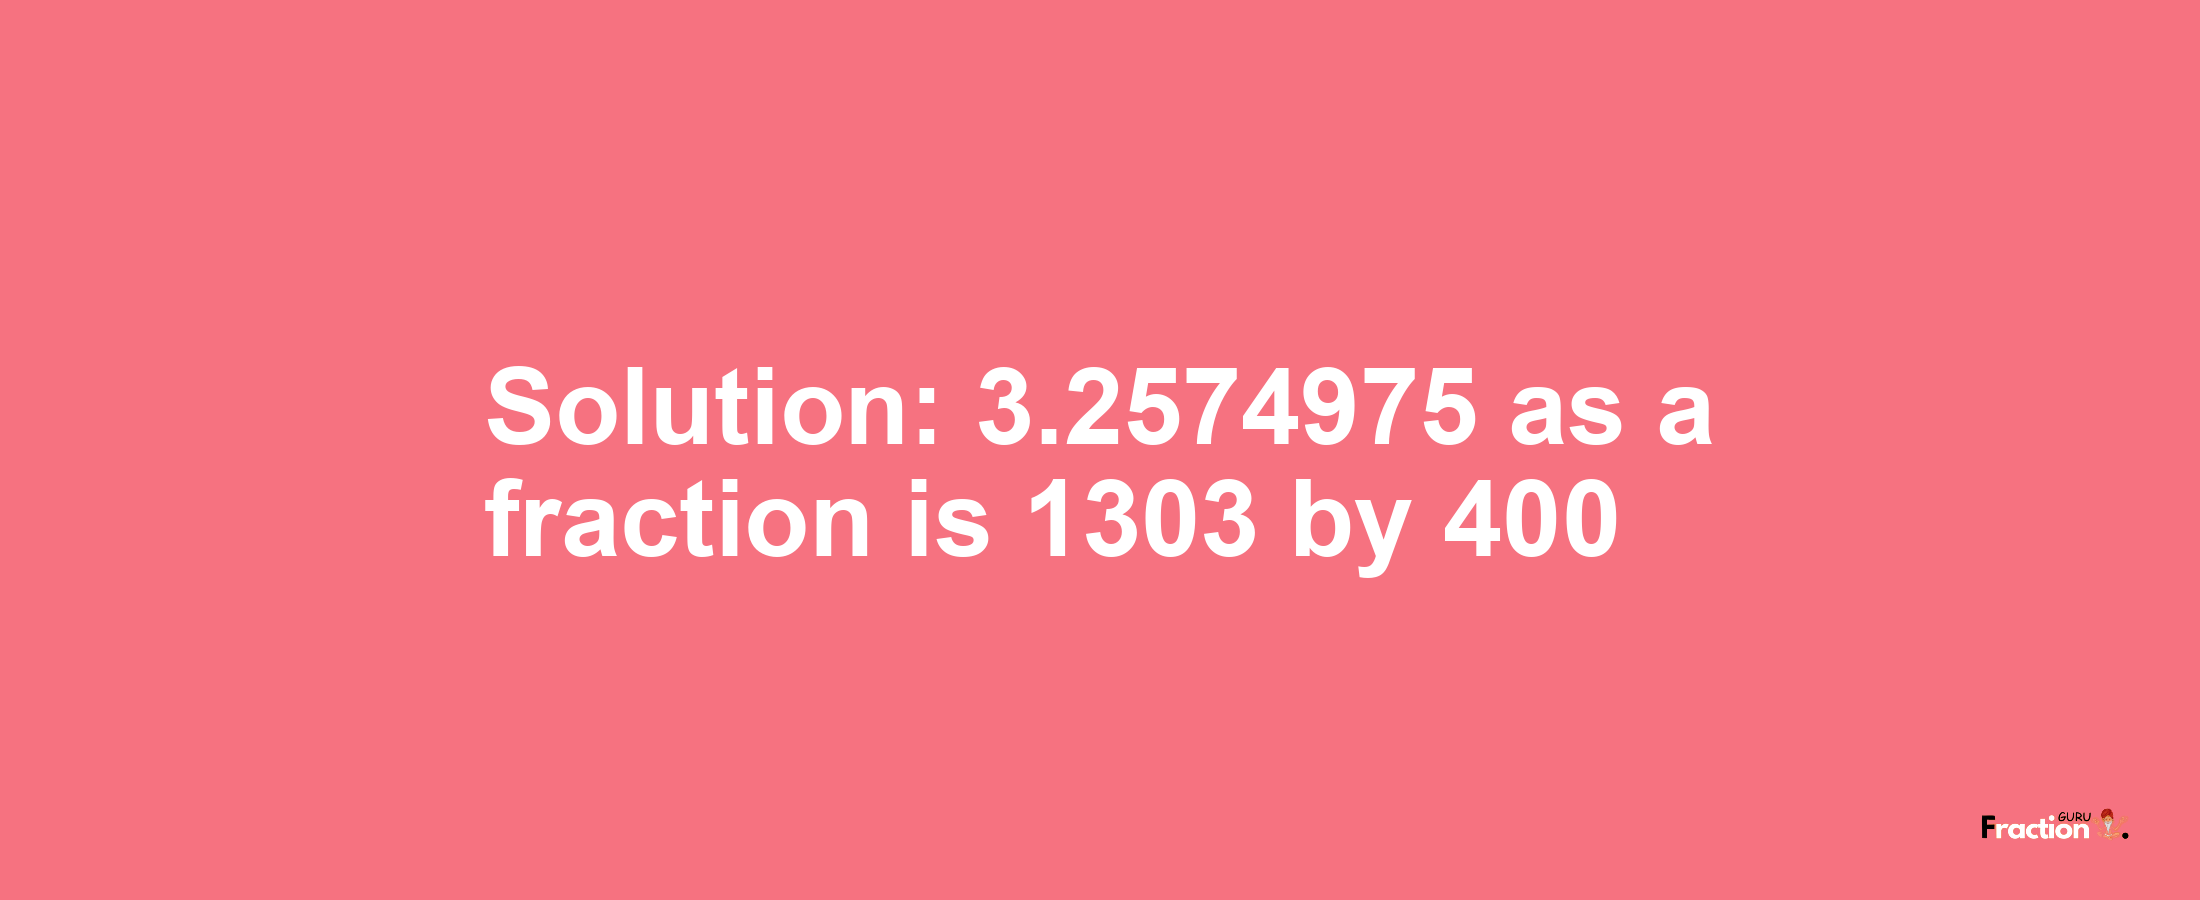 Solution:3.2574975 as a fraction is 1303/400